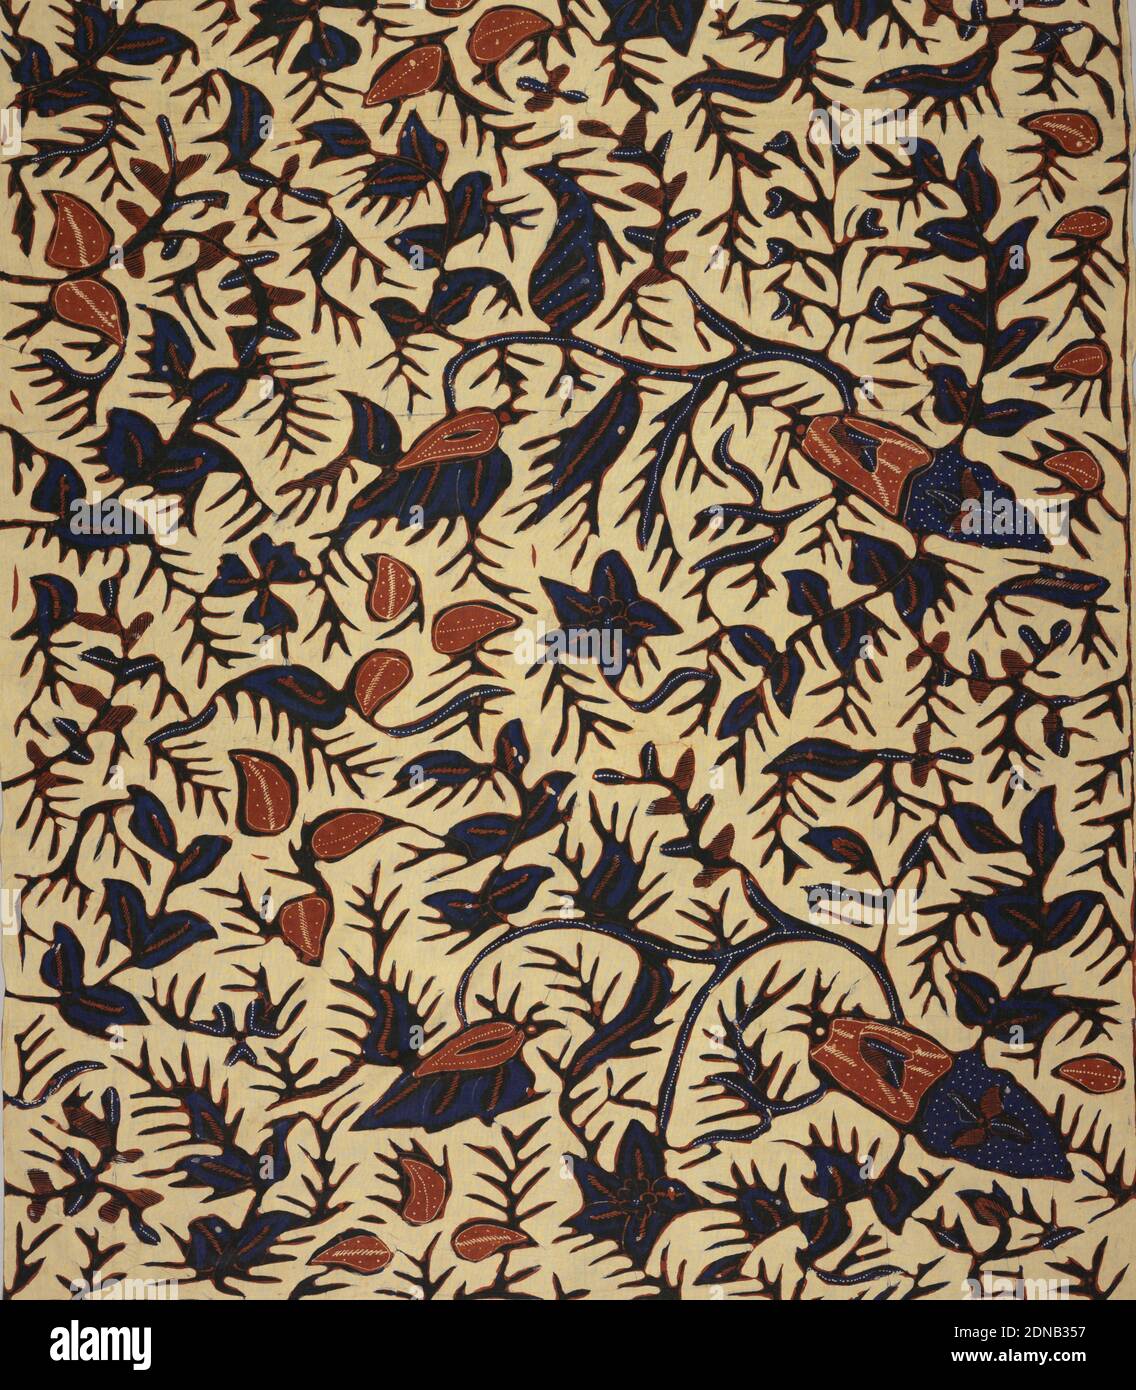 Sarong, Medium: cotton Technique: wax resist dyeing (batik) on plain weave, A sarong with cream ground and highly conventionalized large-scale floral and foliate design in blue, white, and brown., Indonesia, 19th century, printed, dyed & painted textiles, Sarong Stock Photo